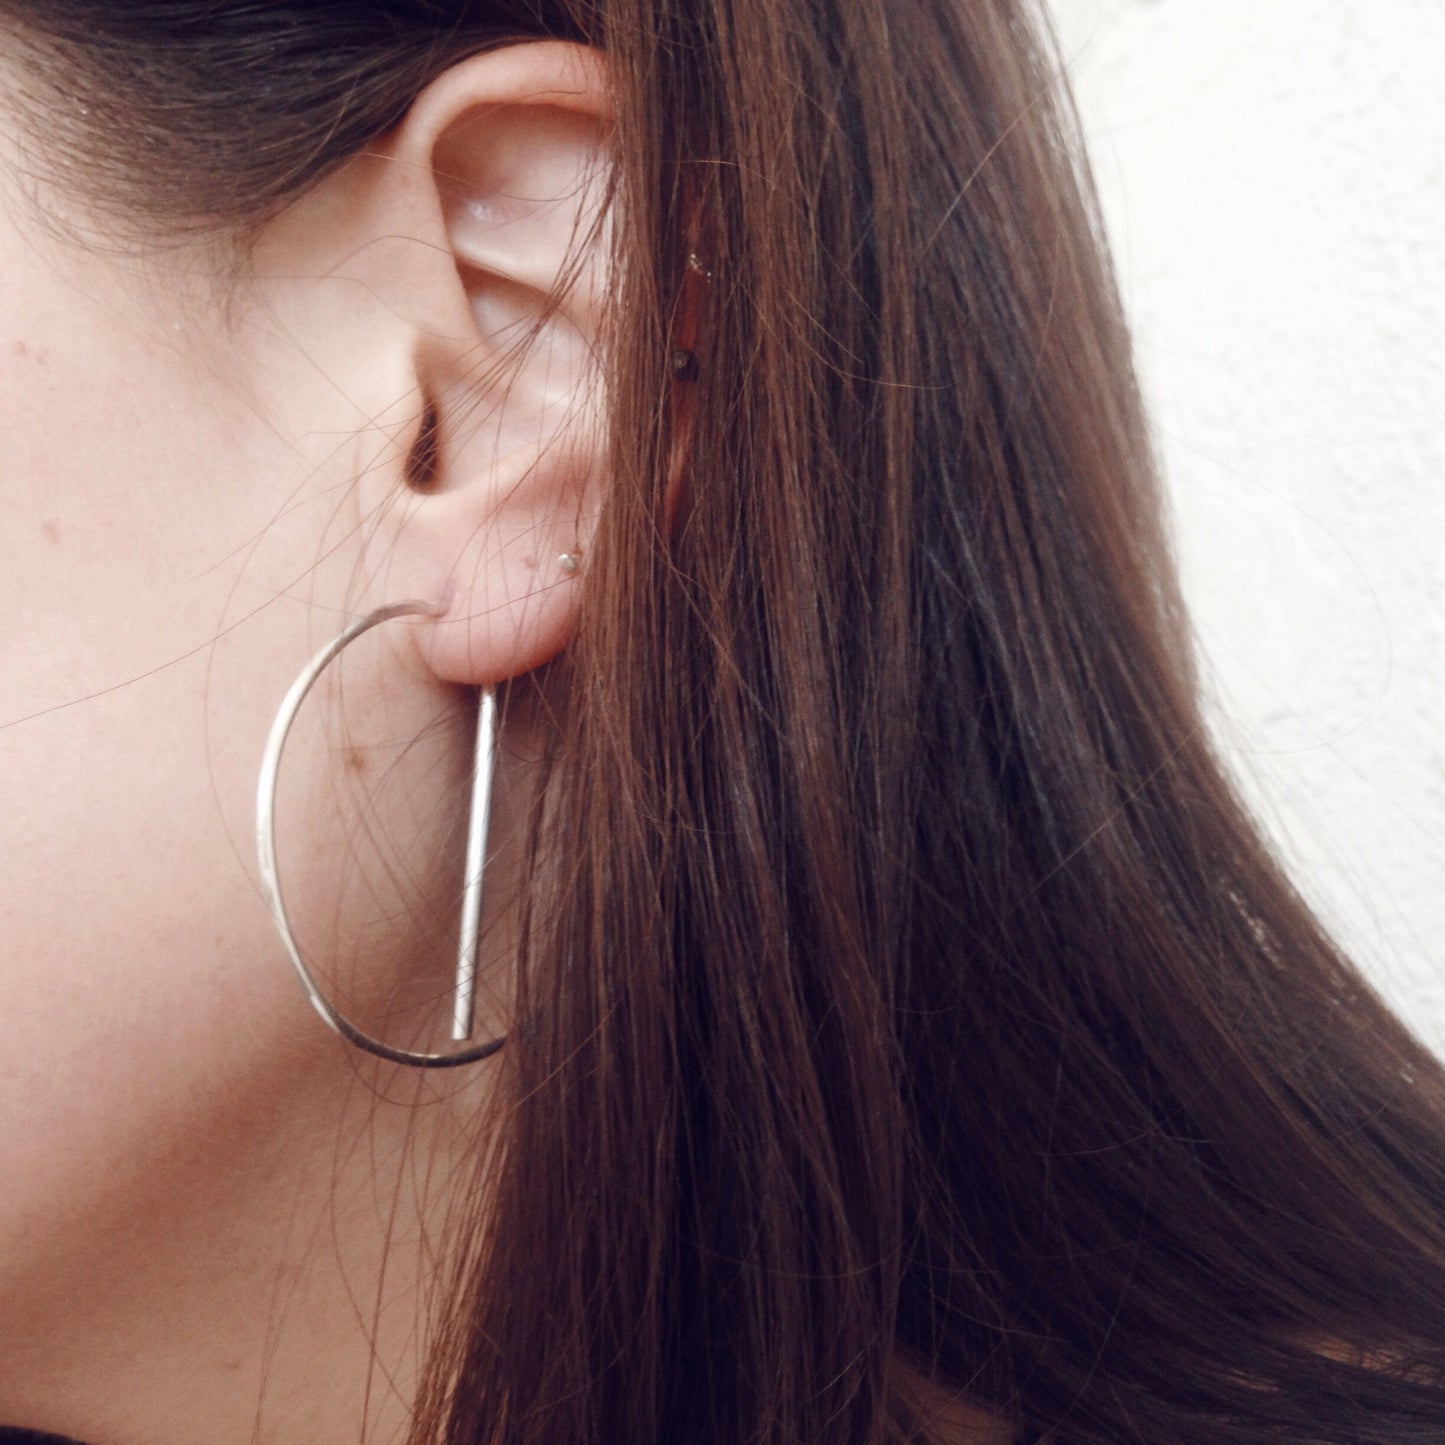 The Most Unlikely Places, Small jacket hoops